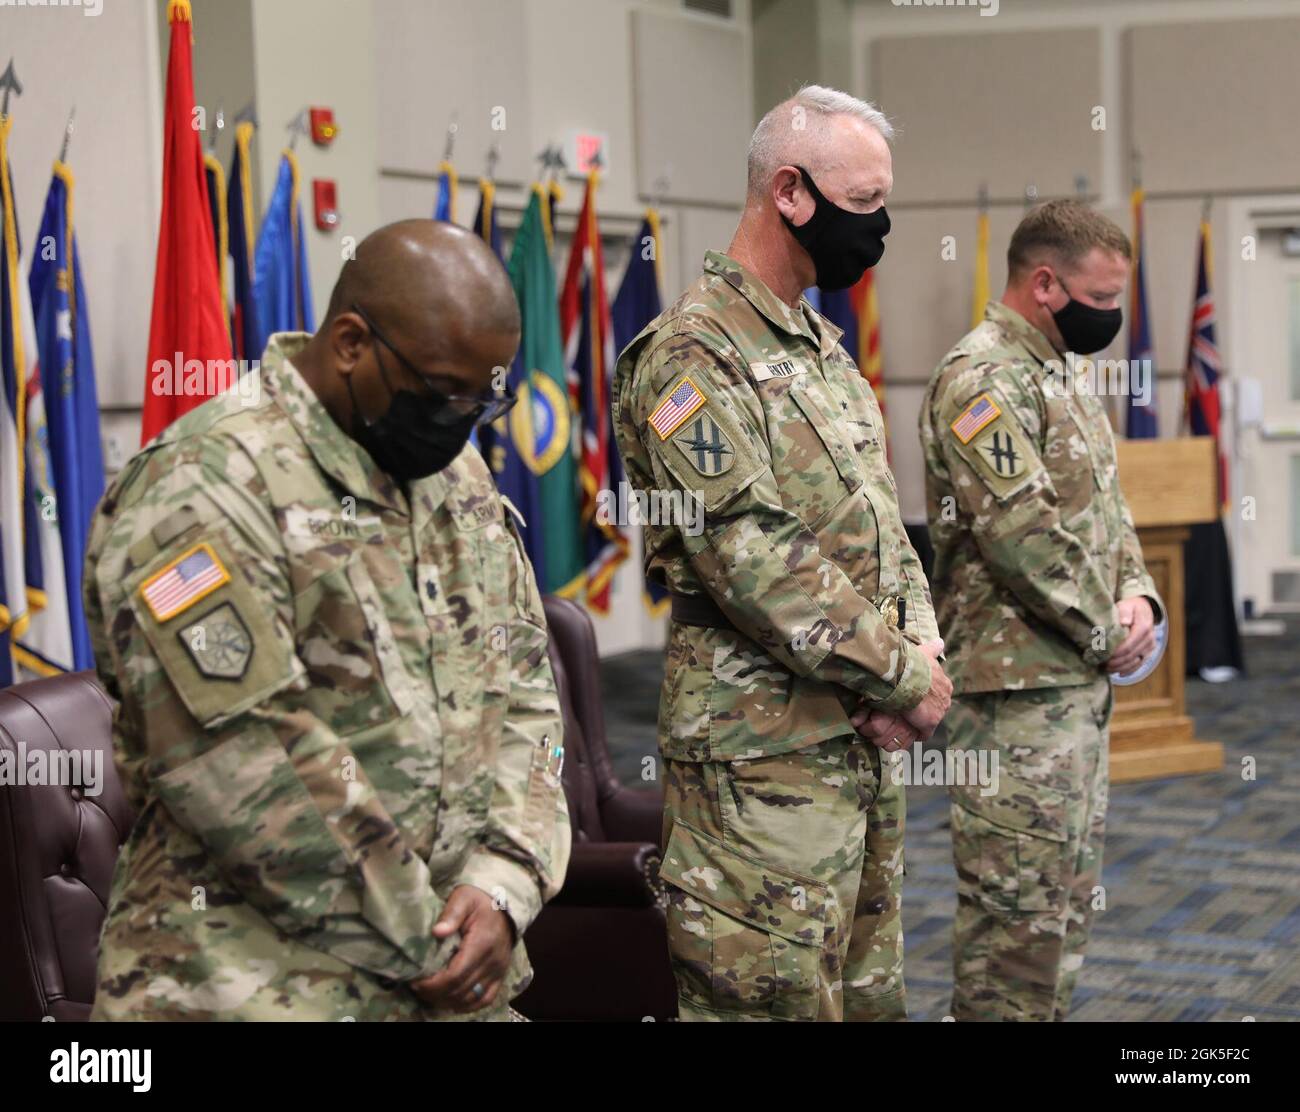 U.S. Army Brigadier General John Gentry, commander of the Marietta-based 78th Troop Command, Lt. Col. Pervis Brown, the outgoing commander of the Marietta-based 781st Troop Command Battalion, and Maj. Aaron Holt, the incoming commander of the 781st Troop Command Battalion, pray during a change of command ceremony at Clay National Guard Center Marietta, Georgia, on August 7, 2021. Invocation is a traditional part of a change of command ceremony. Stock Photo